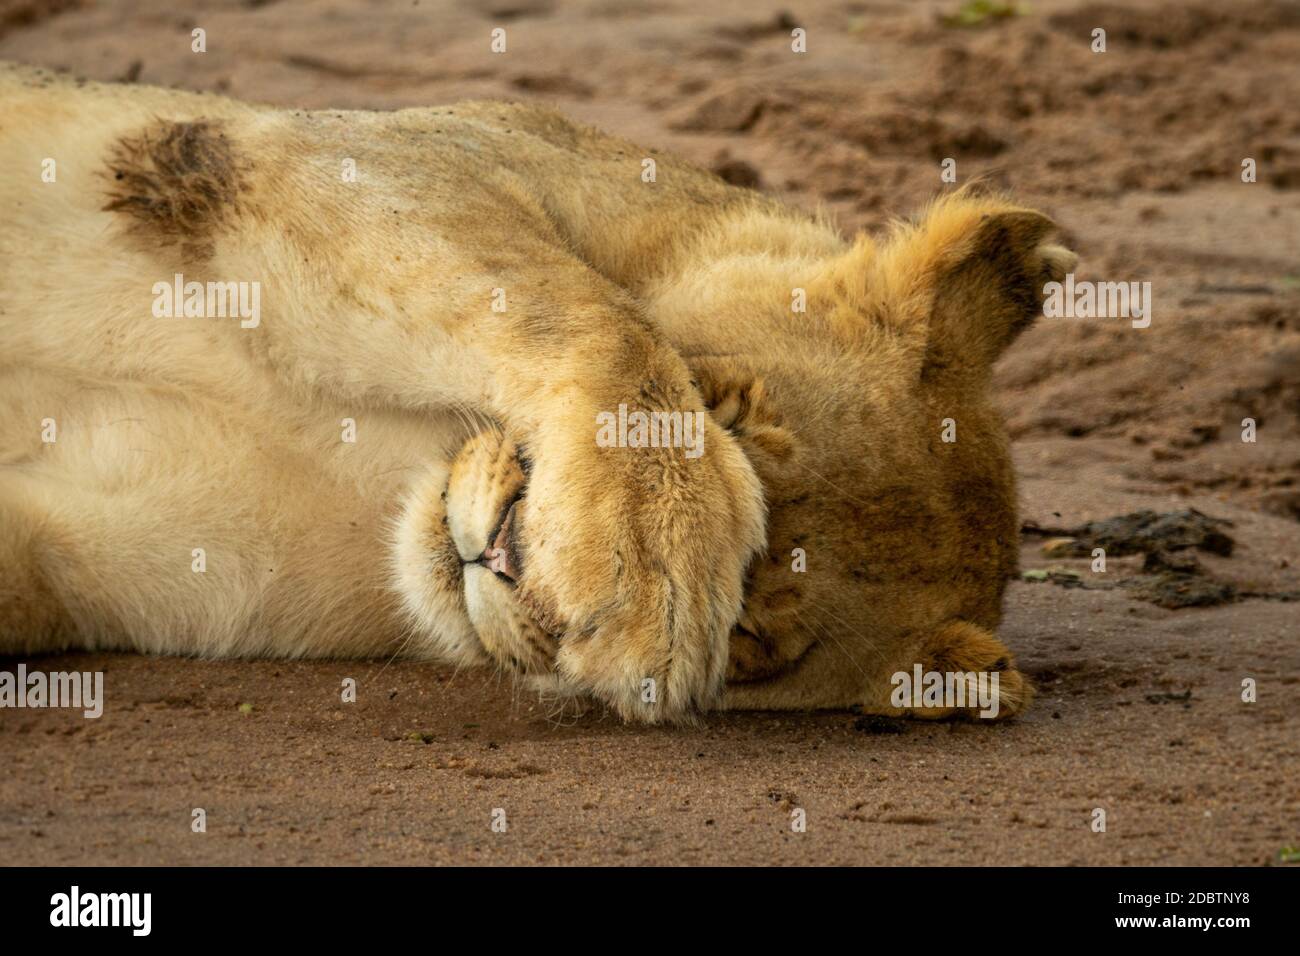 Close-up of lioness covering face with paw Stock Photo